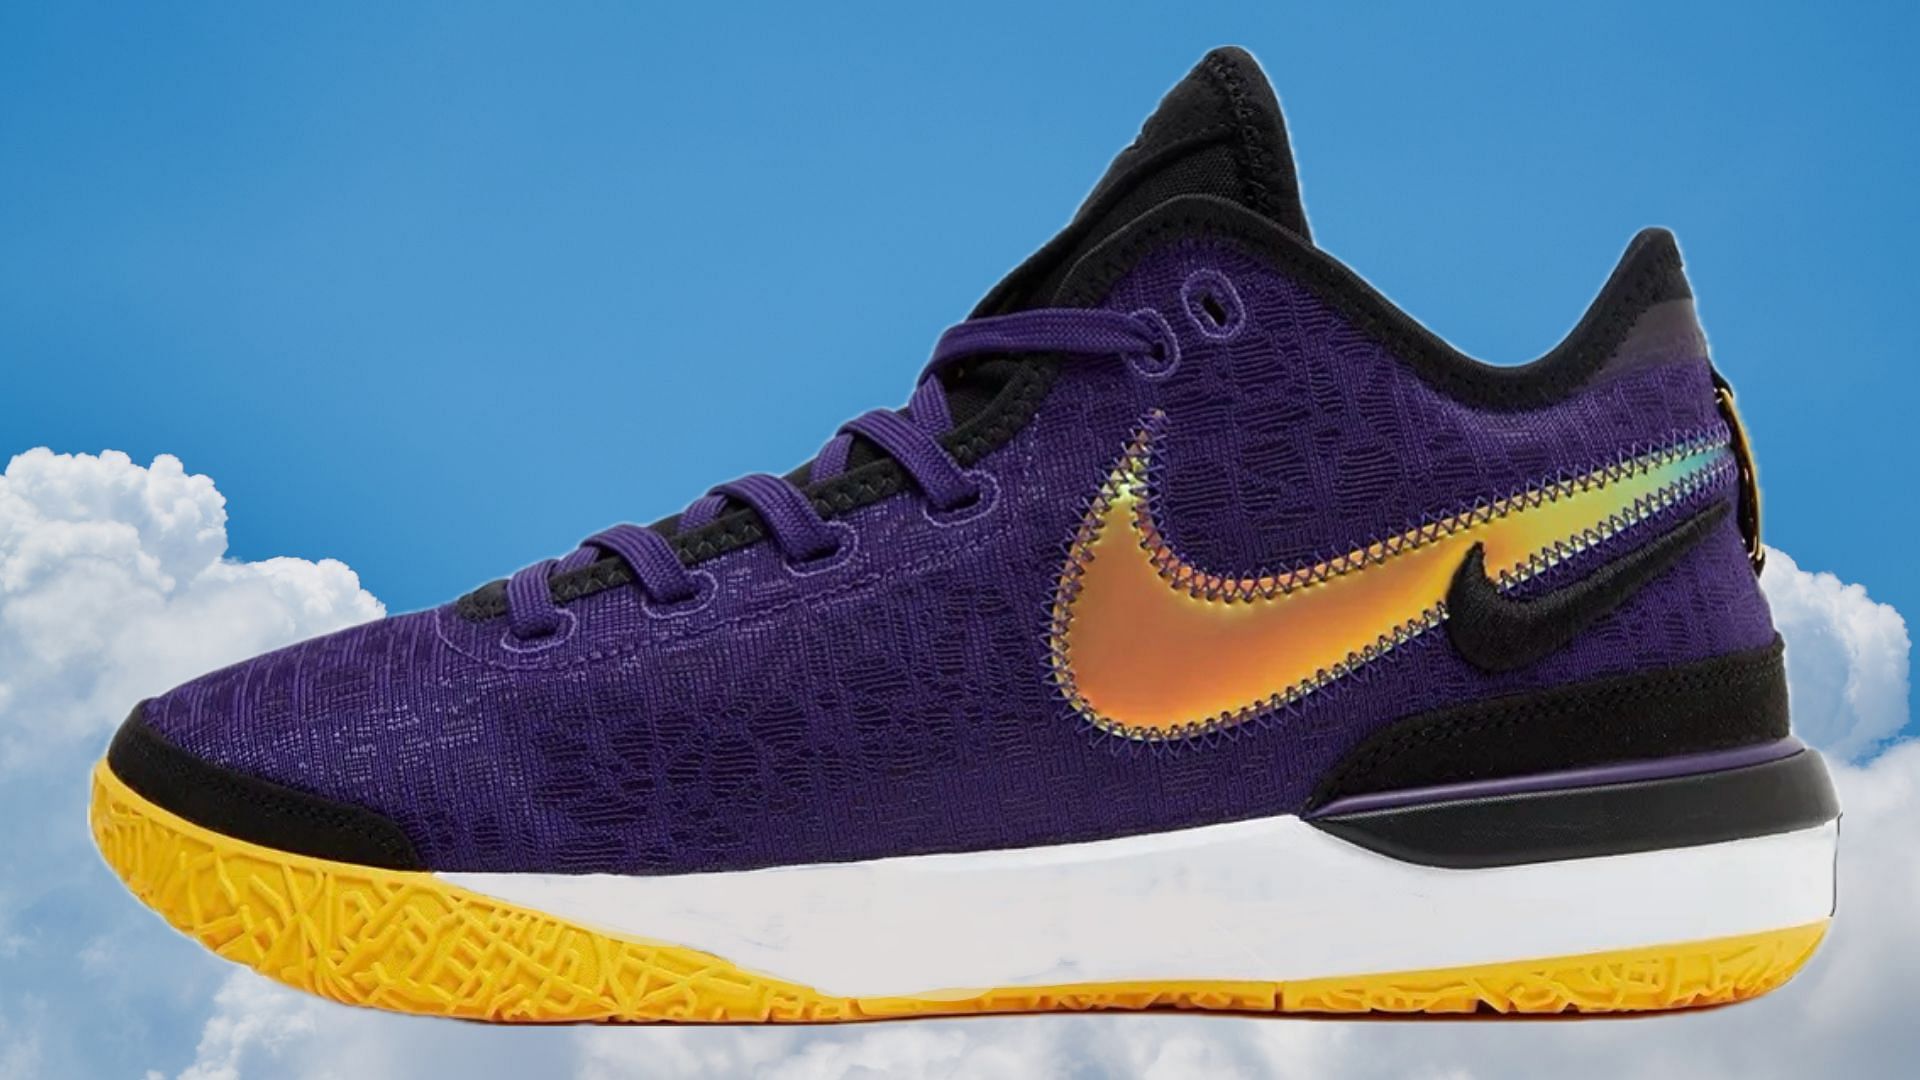 Lakers: LeBron James planned to debut new, purple and gold LeBron